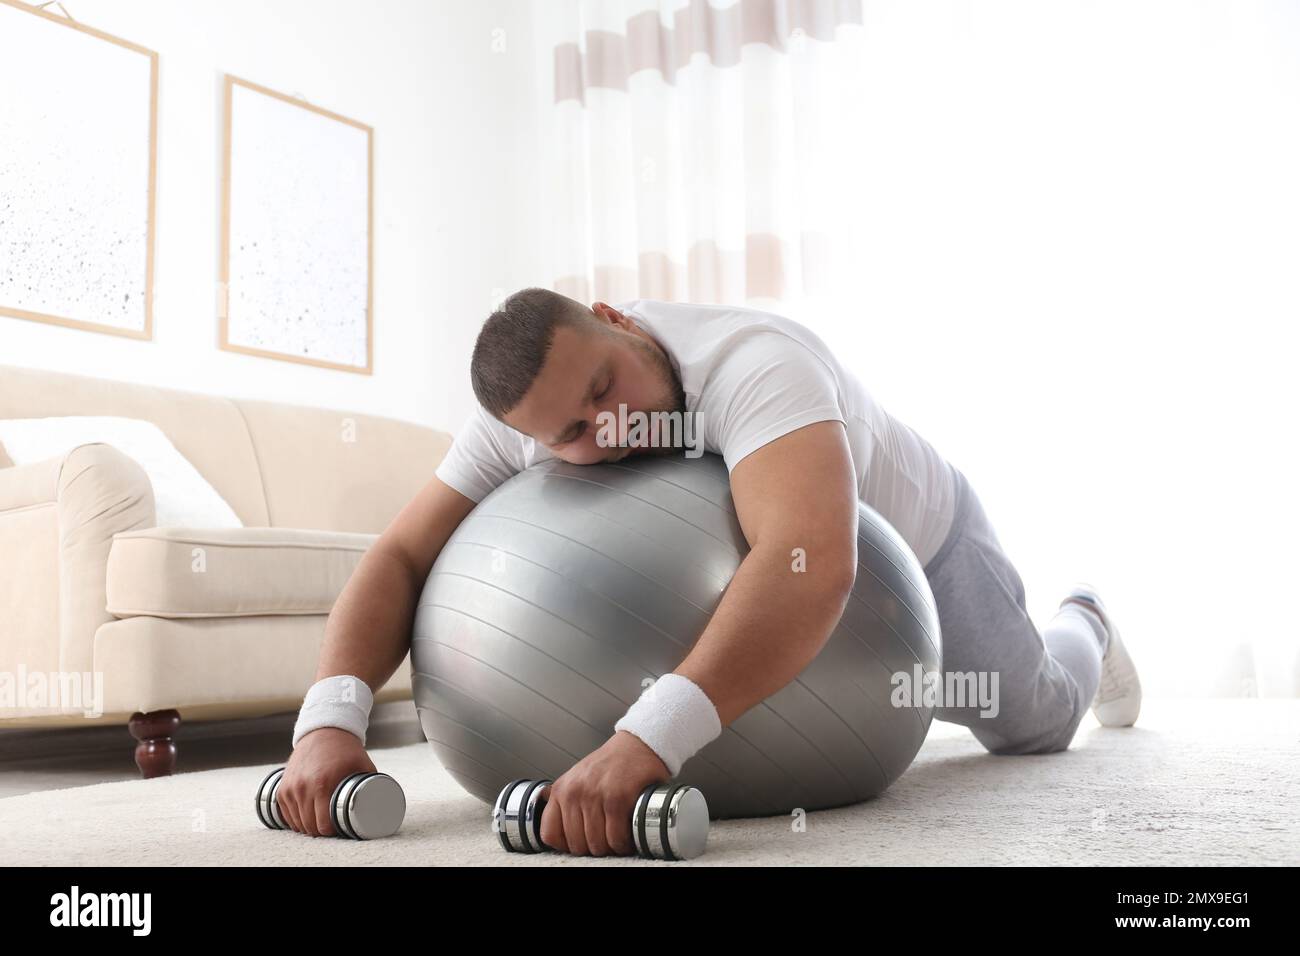 Lazy overweight man with sport equipment sleeping on floor at home Stock Photo